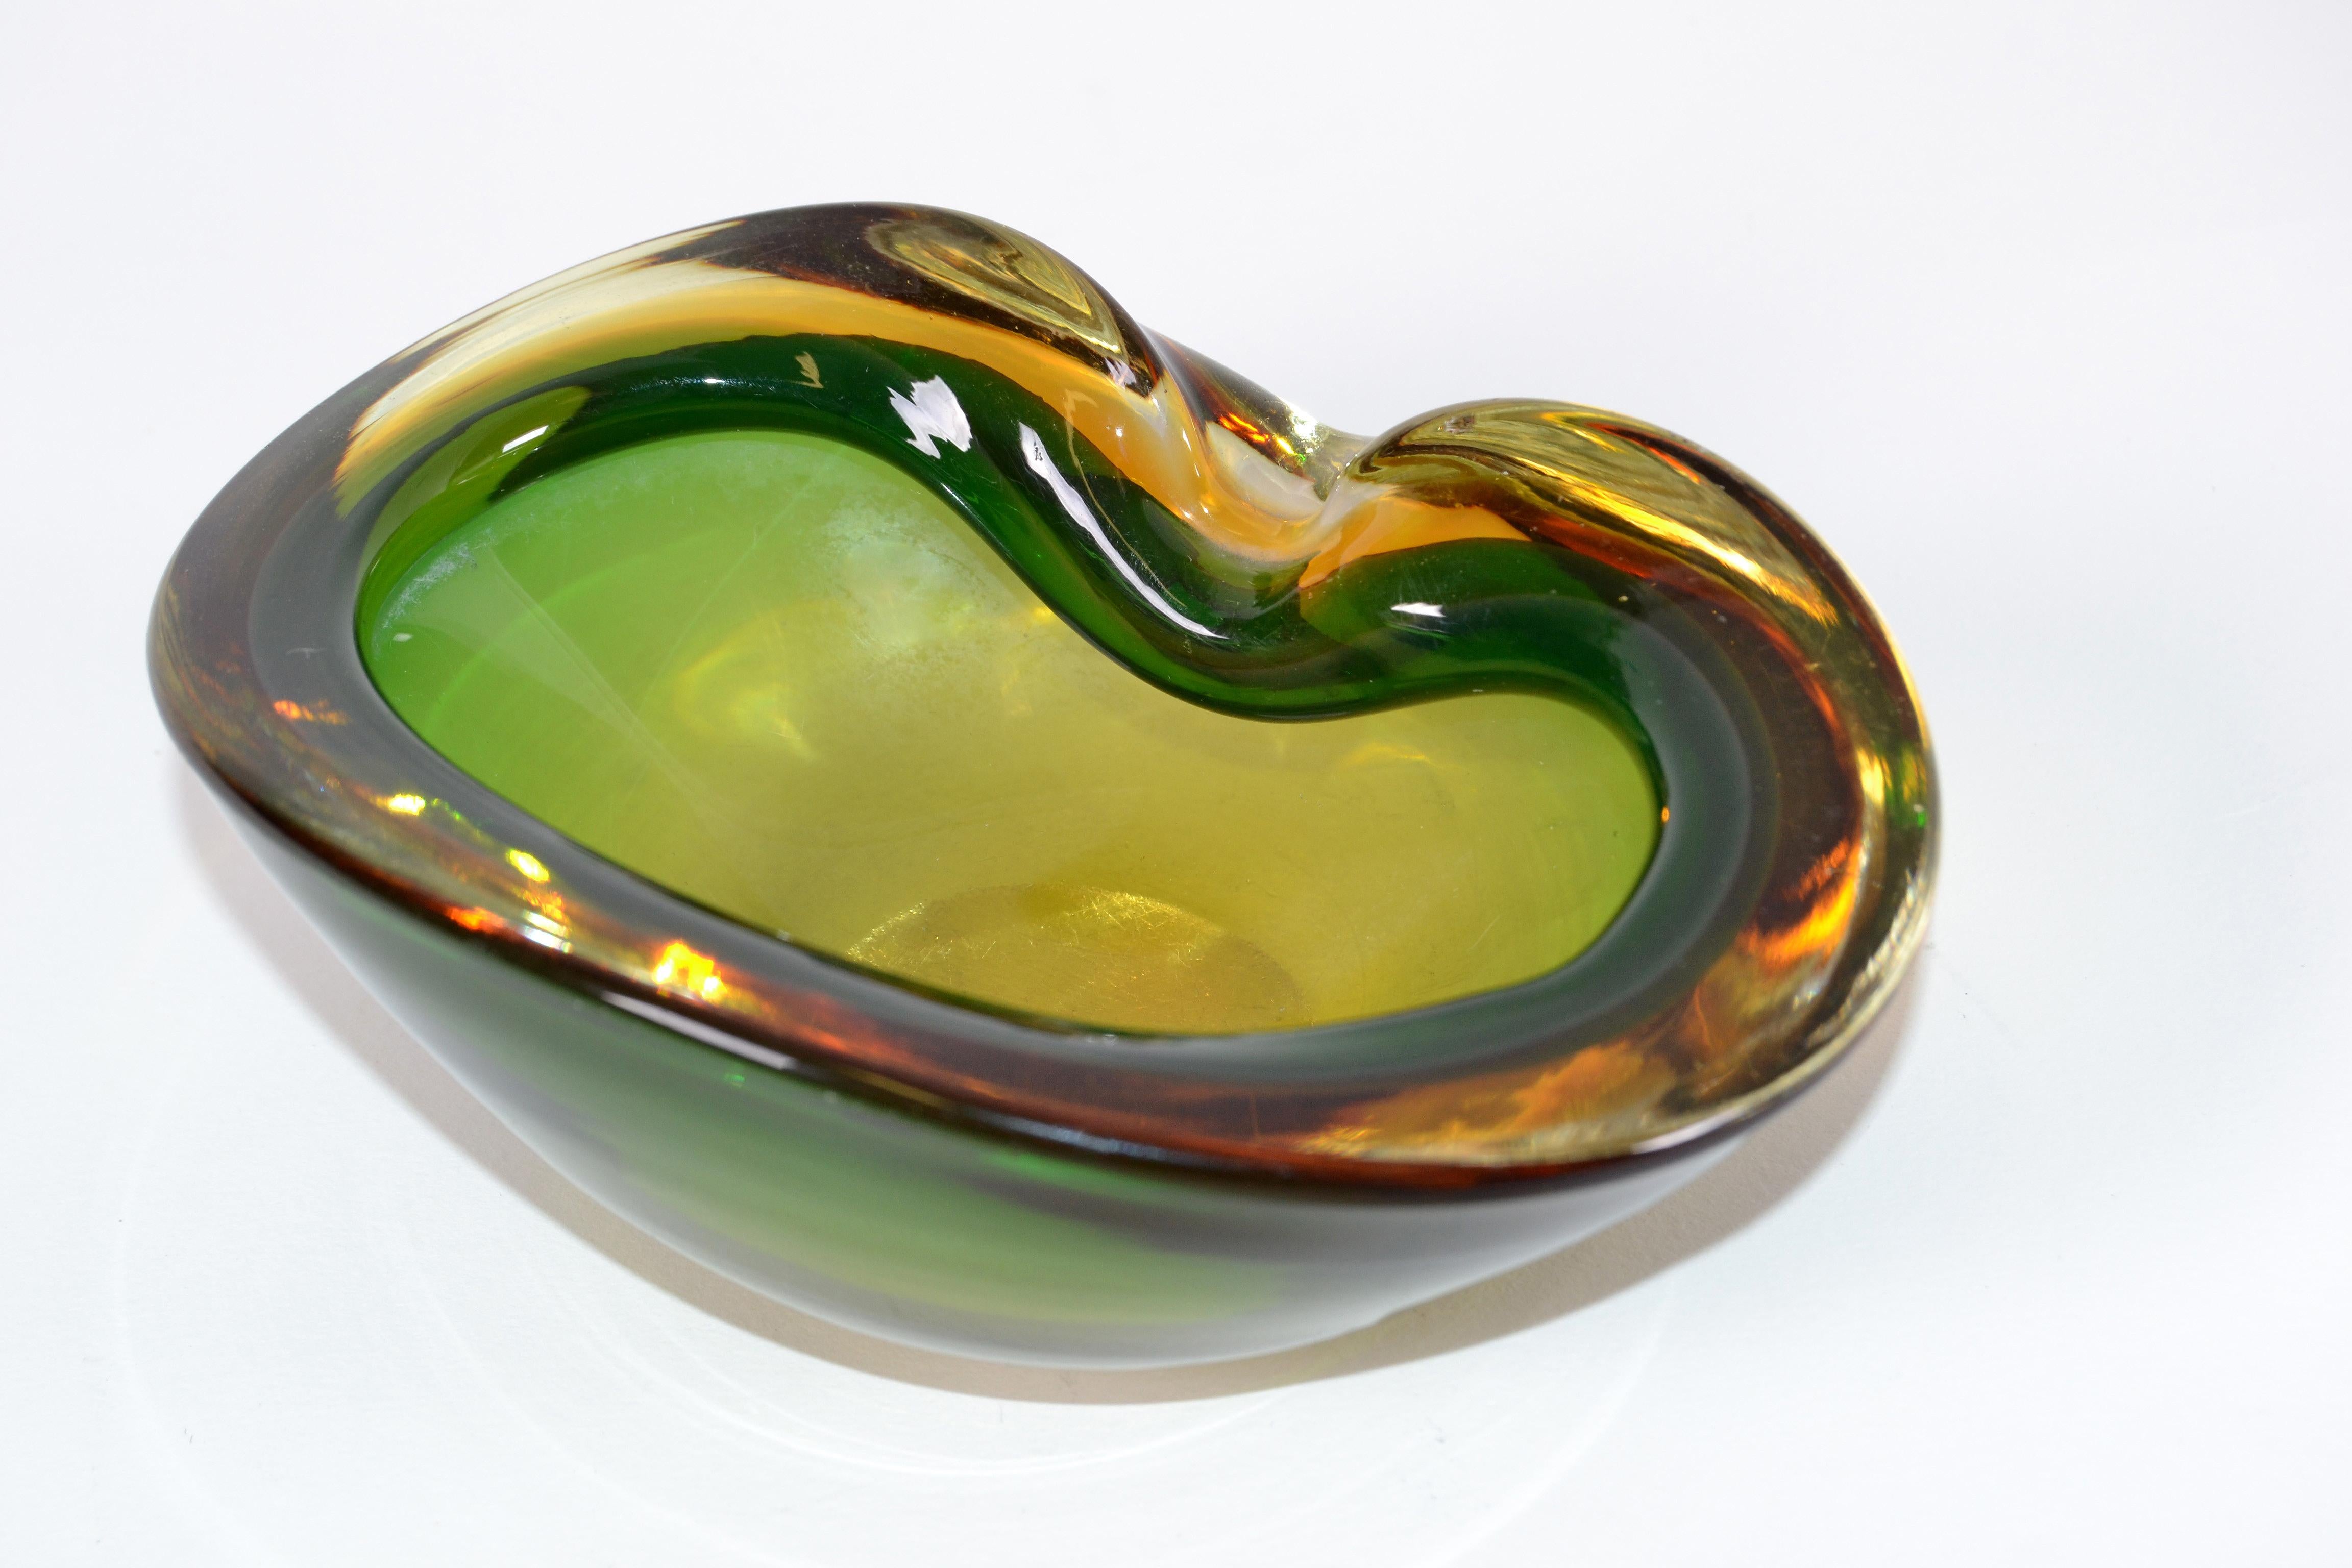 Italian Mid-Century Modern green and amber glass bowl, catchall or ashtray that is in oval form.
Made in the late 20th century.
Simply beautiful.